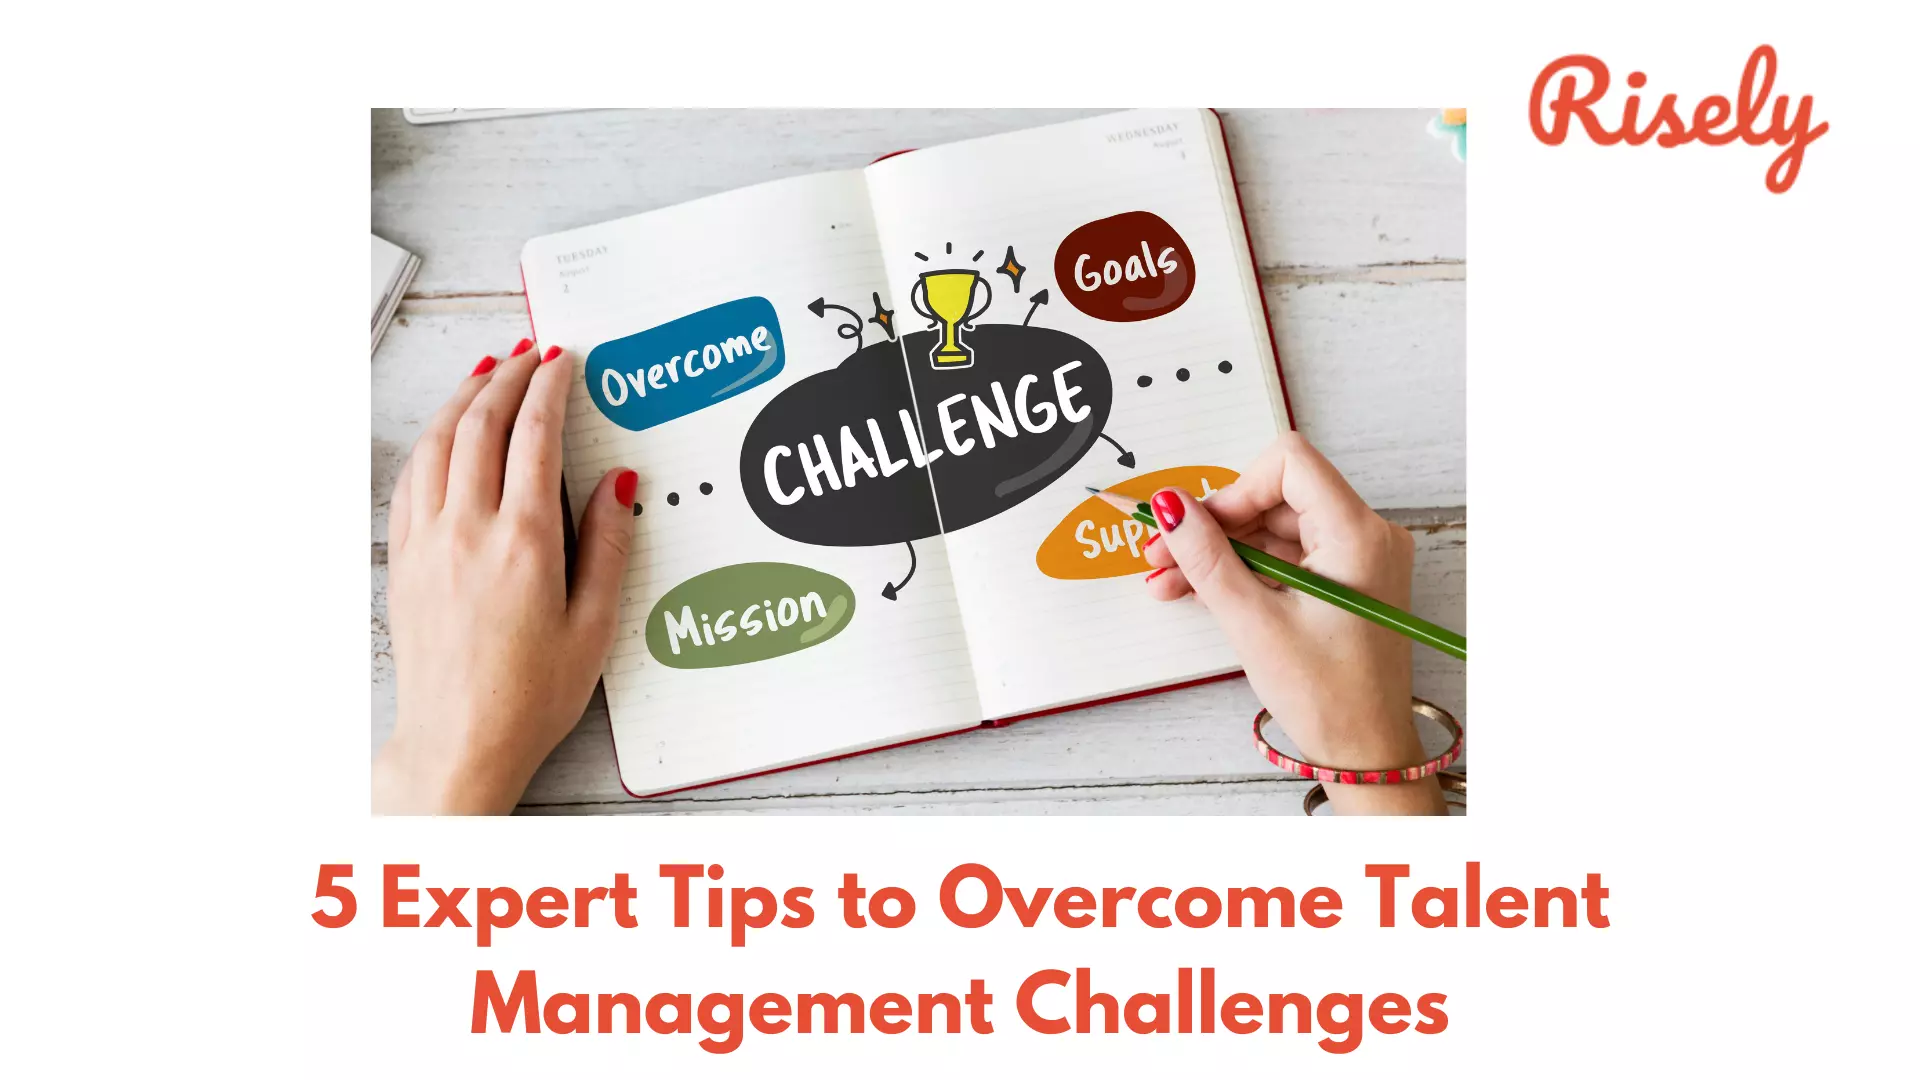 5 Expert Tips to Overcome Talent Management Challenges